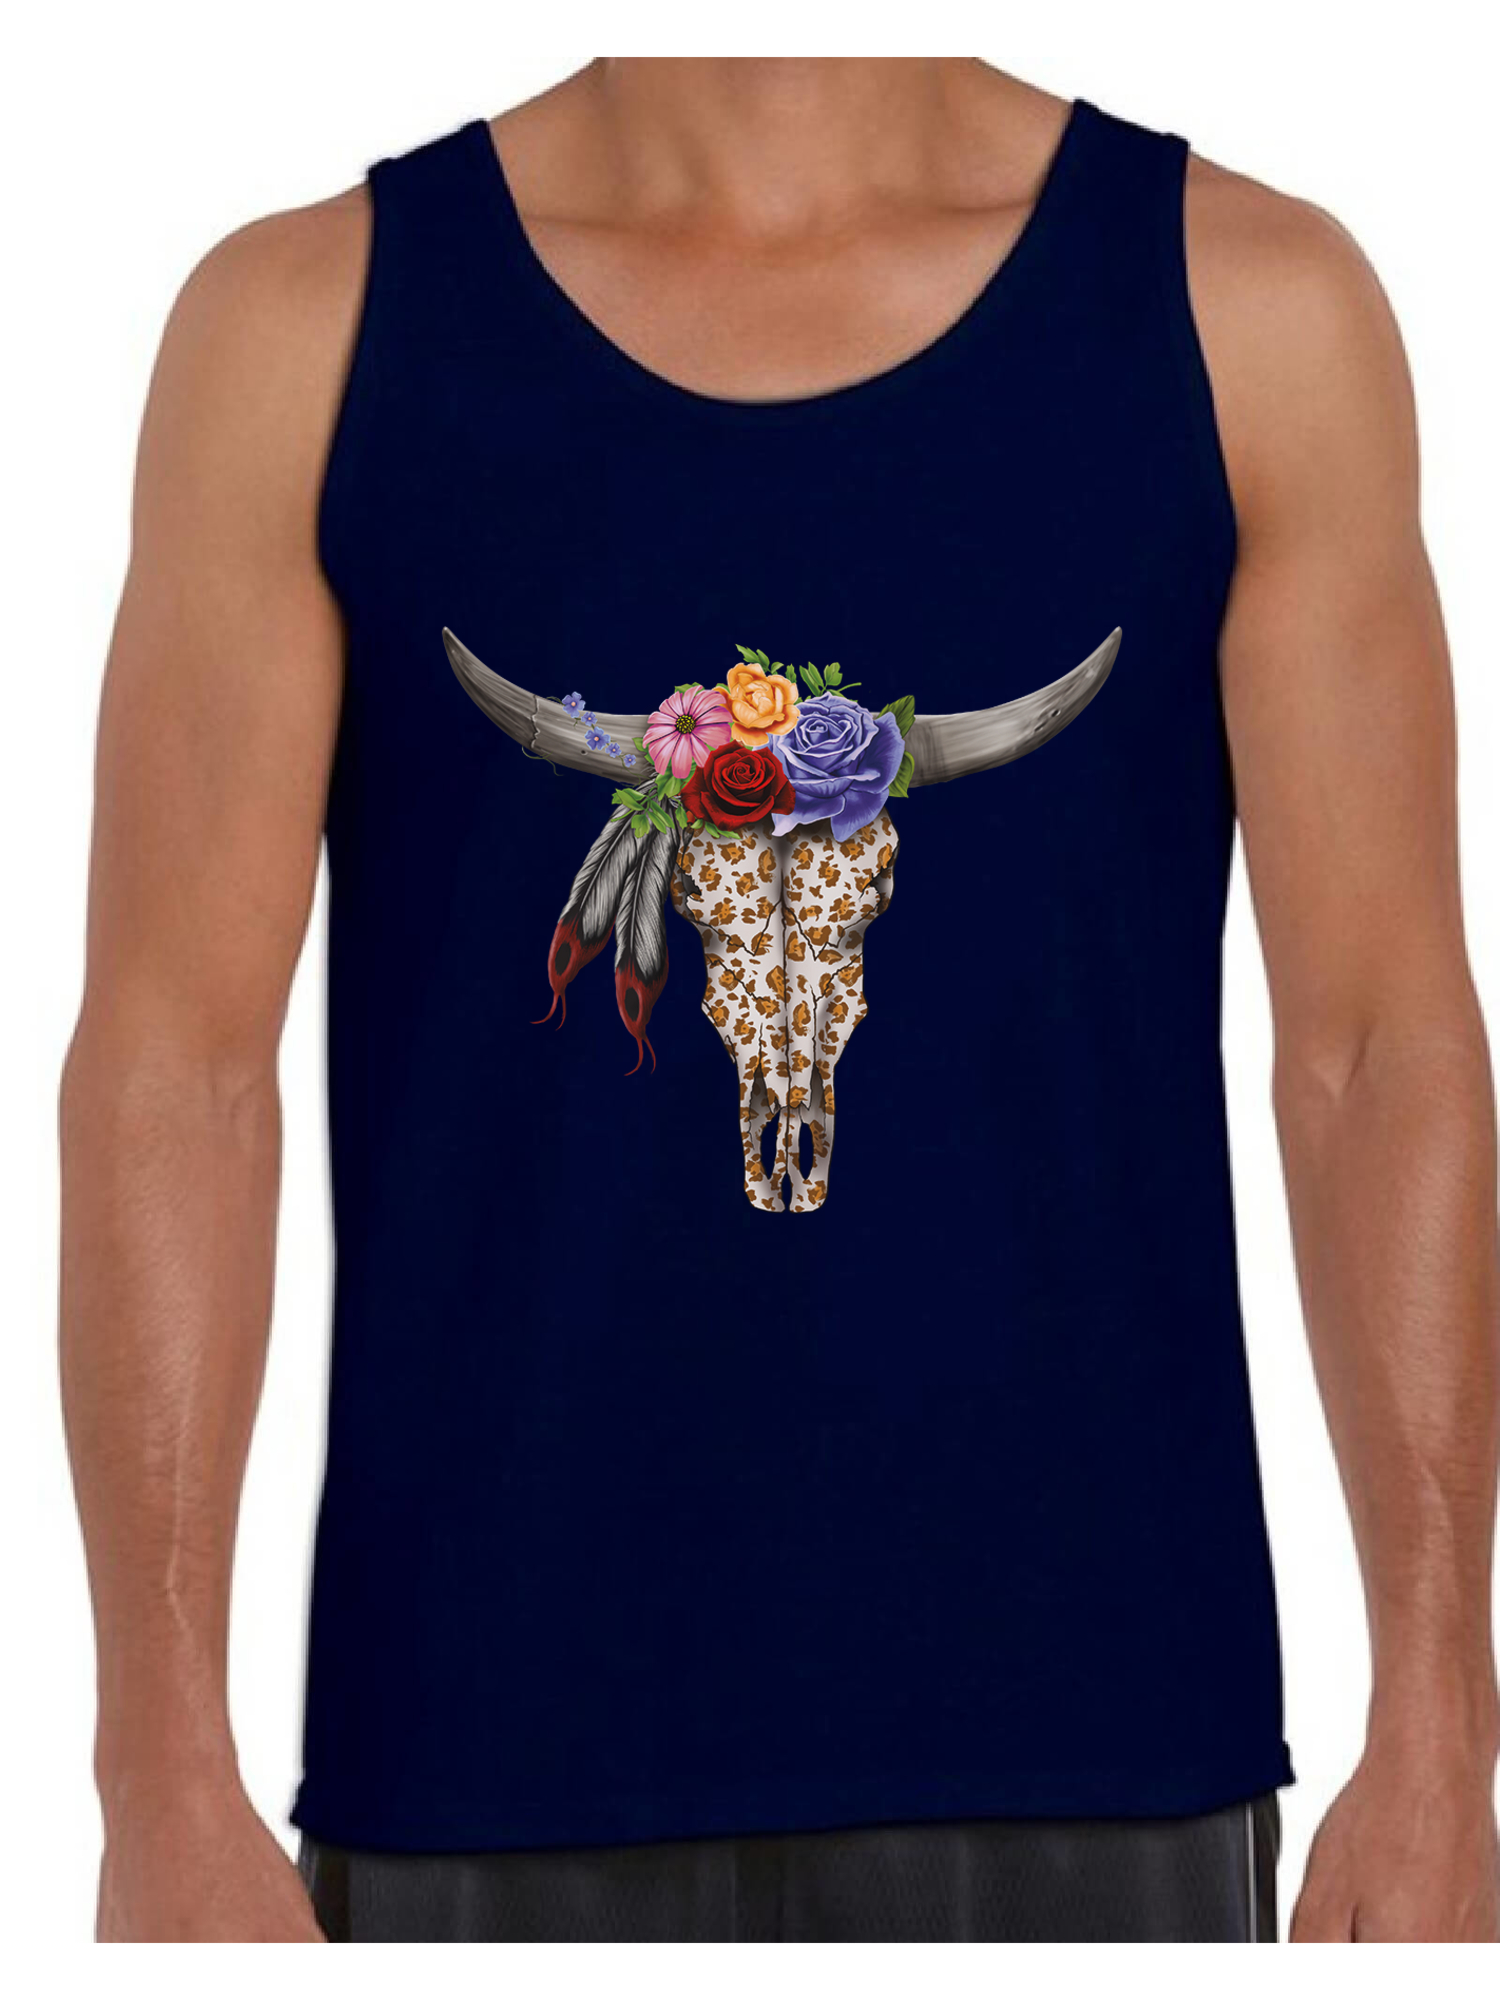 Awkward Styles Cow Skull Tank Top for Men Floral Cow Skull Tank Bull Skull Flowers Muscle Shirt for Men Dia de los Muertos Outfit Day of the Dead Gifts for Him Bull Skull Tank Sugar Skull Men's Shirt - image 1 of 4